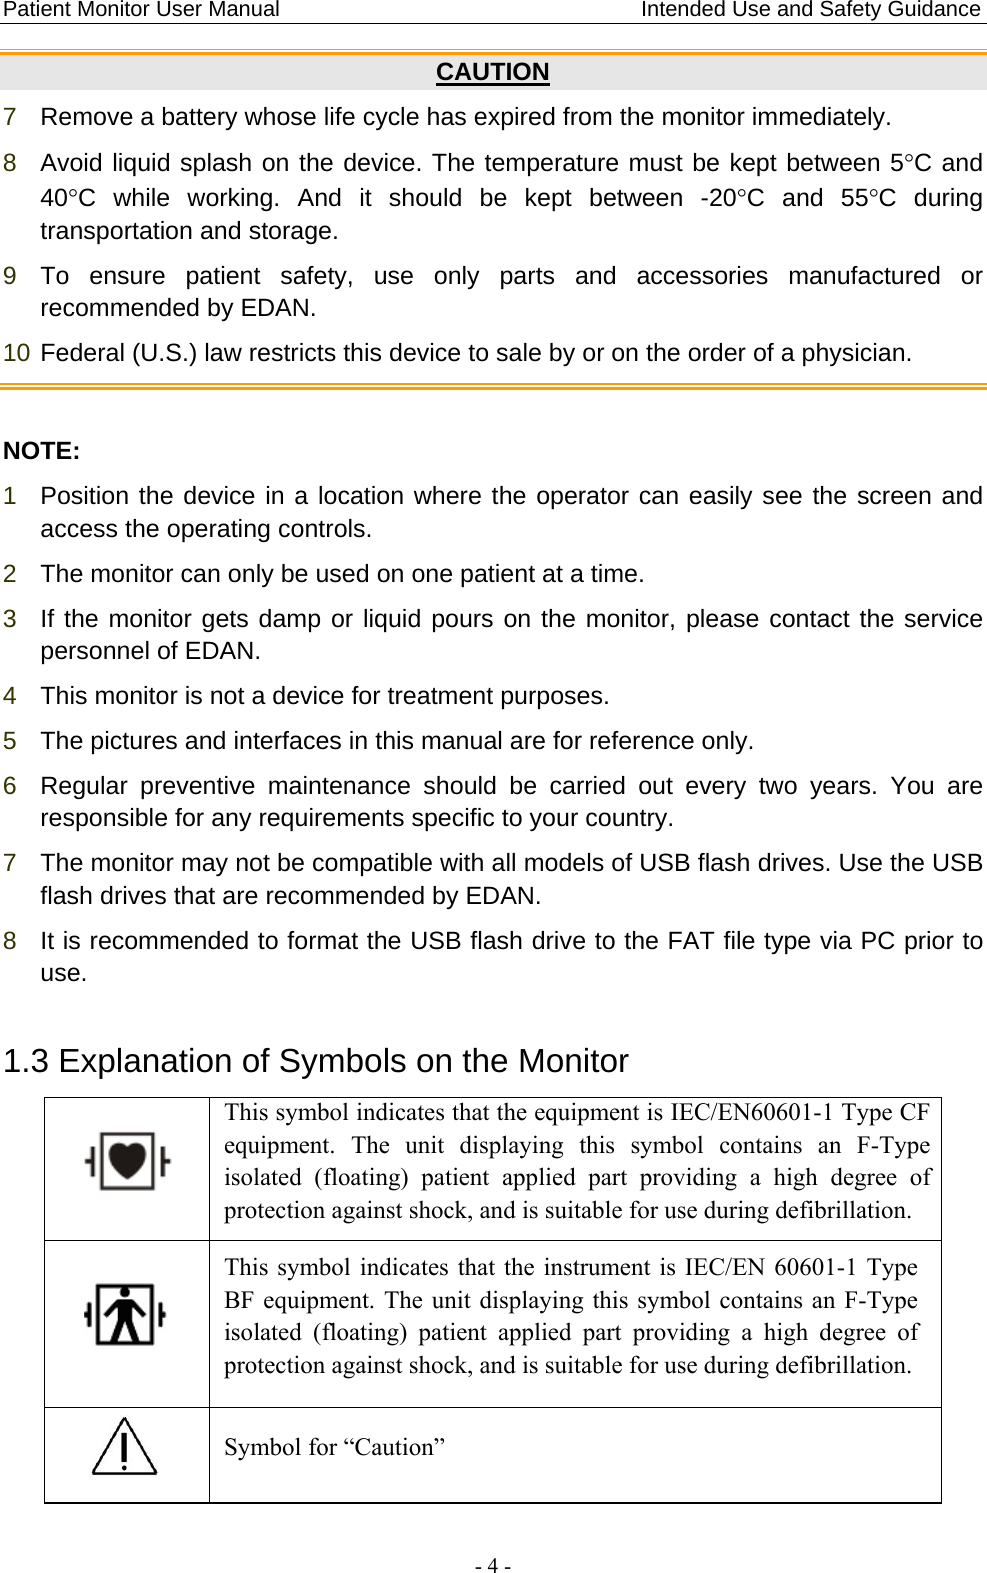 Patient Monitor User Manual                                 Intended Use and Safety Guidance  - 4 - CAUTION 7  Remove a battery whose life cycle has expired from the monitor immediately. 8  Avoid liquid splash on the device. The temperature must be kept between 5°C and 40°C while working. And it should be kept between -20°C and 55°C during transportation and storage. 9  To ensure patient safety, use only parts and accessories manufactured or recommended by EDAN. 10 Federal (U.S.) law restricts this device to sale by or on the order of a physician.  NOTE: 1  Position the device in a location where the operator can easily see the screen and access the operating controls. 2  The monitor can only be used on one patient at a time.   3  If the monitor gets damp or liquid pours on the monitor, please contact the service personnel of EDAN. 4  This monitor is not a device for treatment purposes. 5  The pictures and interfaces in this manual are for reference only. 6  Regular preventive maintenance should be carried out every two years. You are responsible for any requirements specific to your country. 7  The monitor may not be compatible with all models of USB flash drives. Use the USB flash drives that are recommended by EDAN. 8  It is recommended to format the USB flash drive to the FAT file type via PC prior to use. 1.3 Explanation of Symbols on the Monitor  This symbol indicates that the equipment is IEC/EN60601-1 Type CF equipment. The unit displaying this symbol contains an F-Type isolated (floating) patient applied part providing a high degree of protection against shock, and is suitable for use during defibrillation.  This symbol indicates that the instrument is IEC/EN 60601-1 Type BF equipment. The unit displaying this symbol contains an F-Type isolated (floating) patient applied part providing a high degree of protection against shock, and is suitable for use during defibrillation.  Symbol for “Caution” 